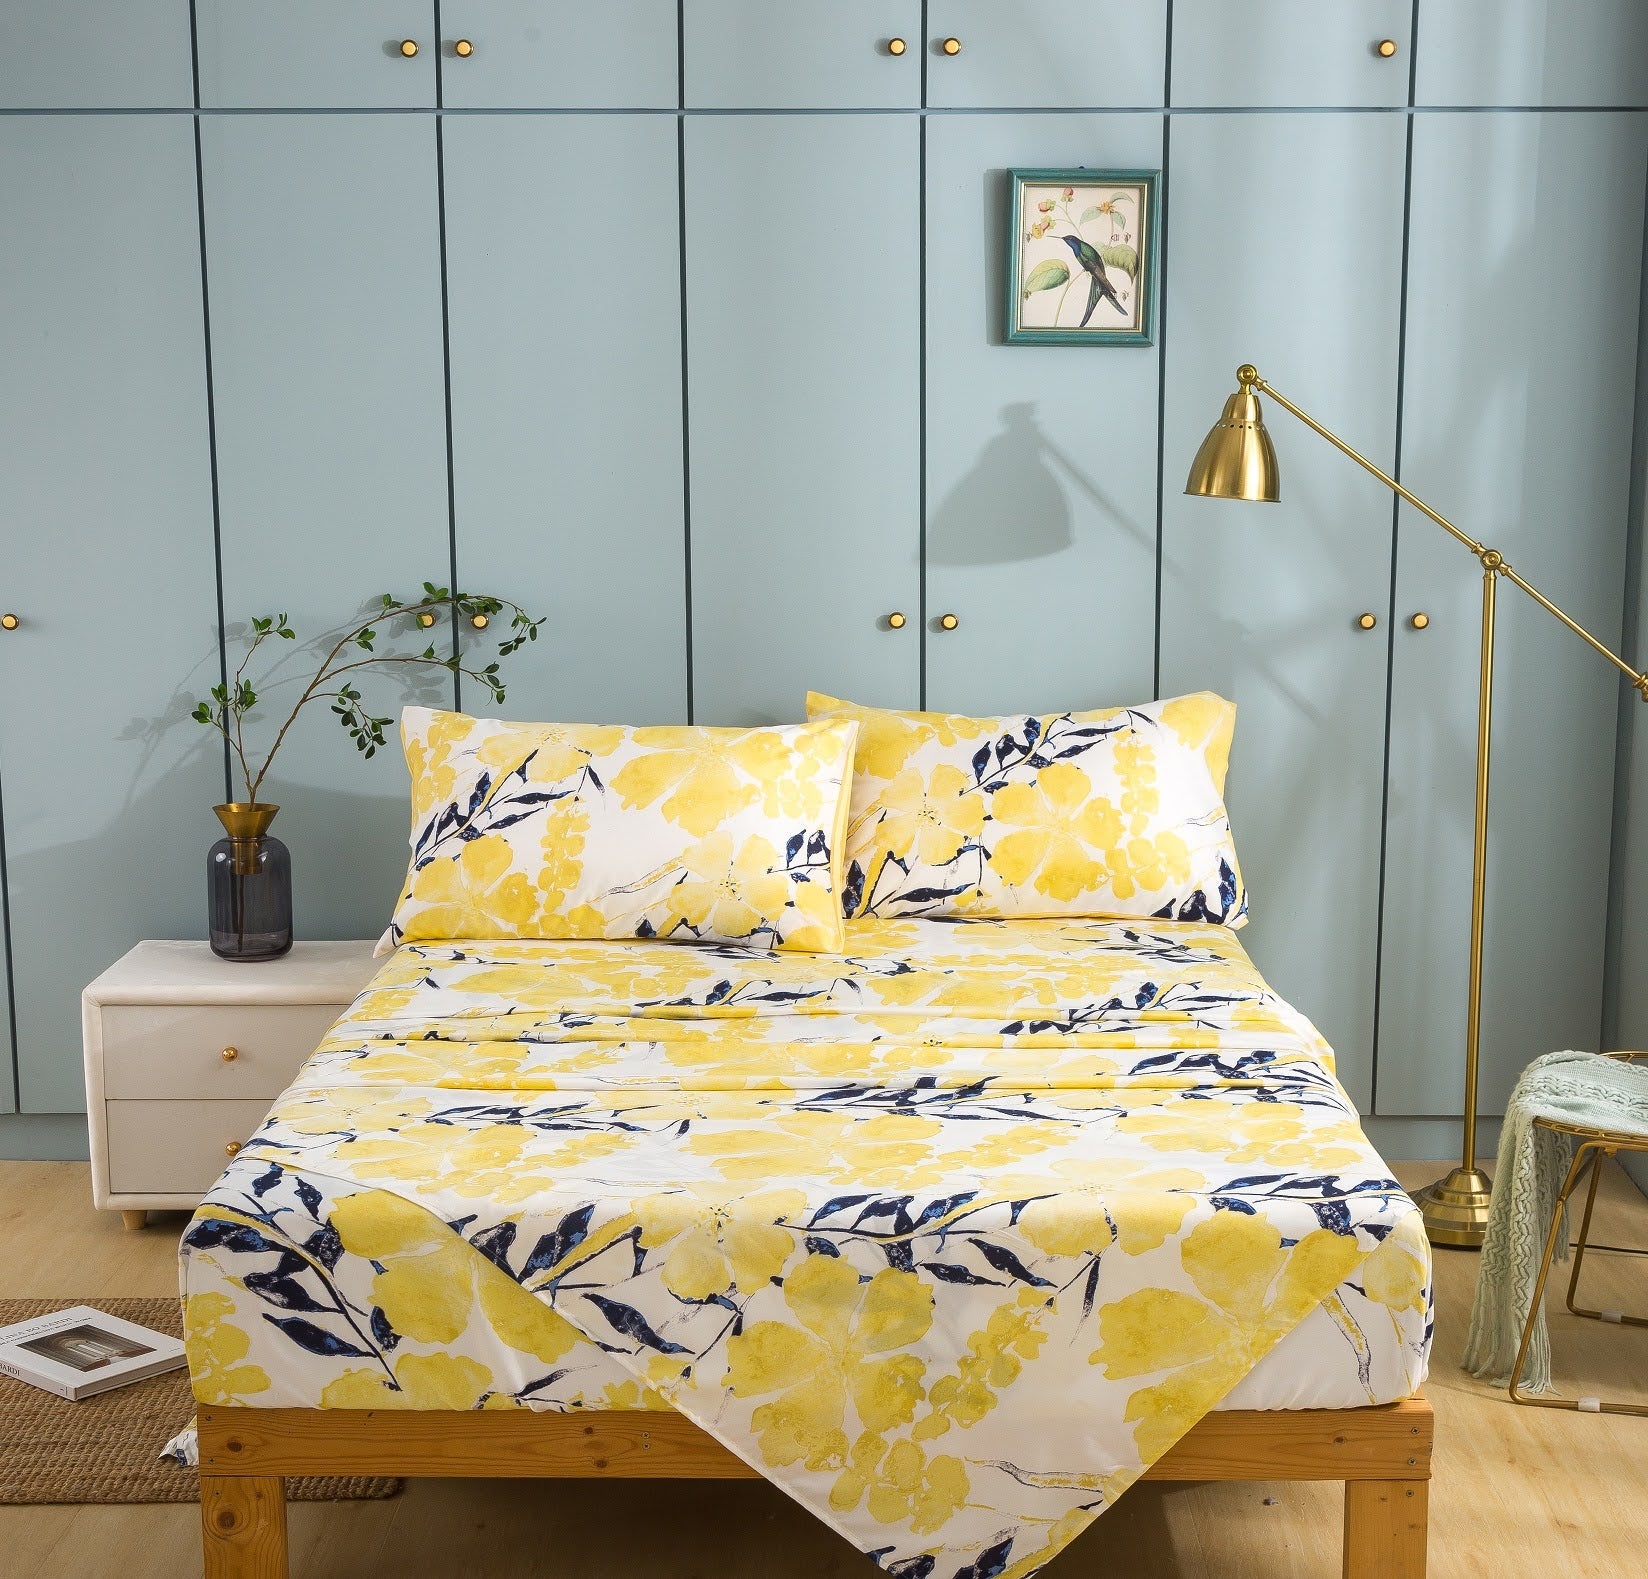 bright yellow leaf pattern sheets on bed. click to view all bed sheets